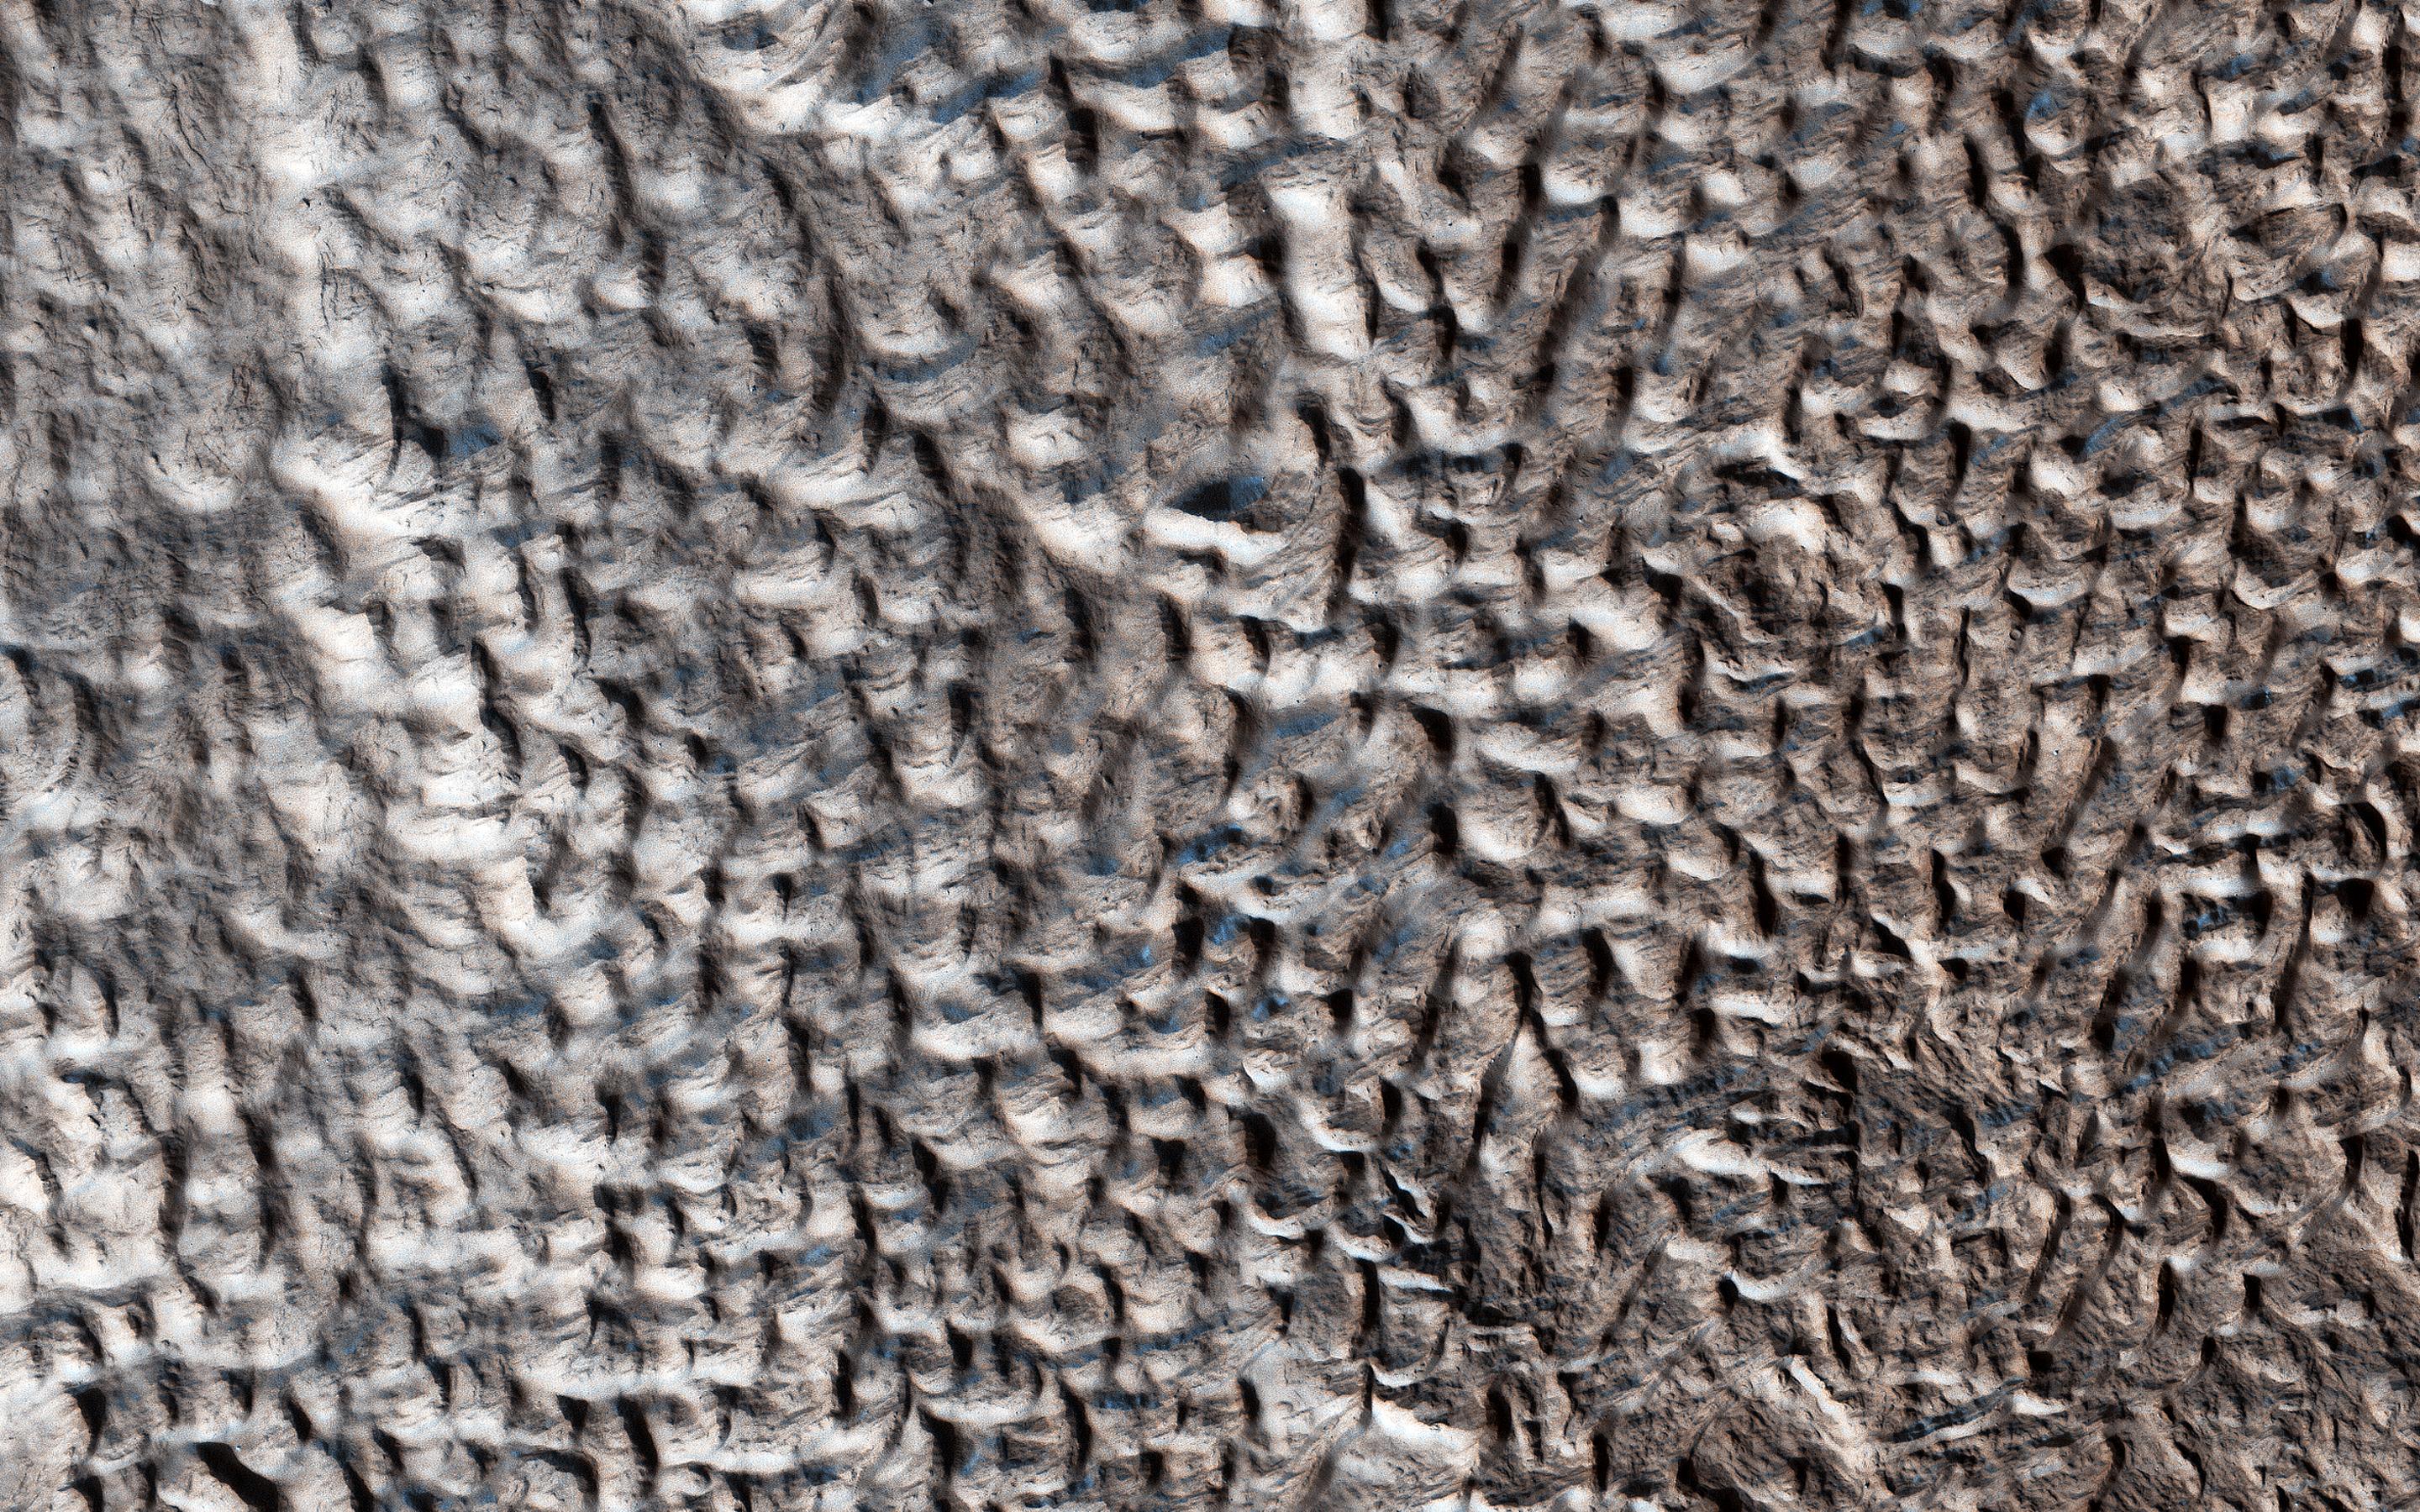 This image acquired on December 11, 2018 by NASAs Mars Reconnaissance Orbiter, shows a surface texture of interconnected ridges and troughs, referred to as brain terrain, found throughout the mid-latitude regions of Mars.